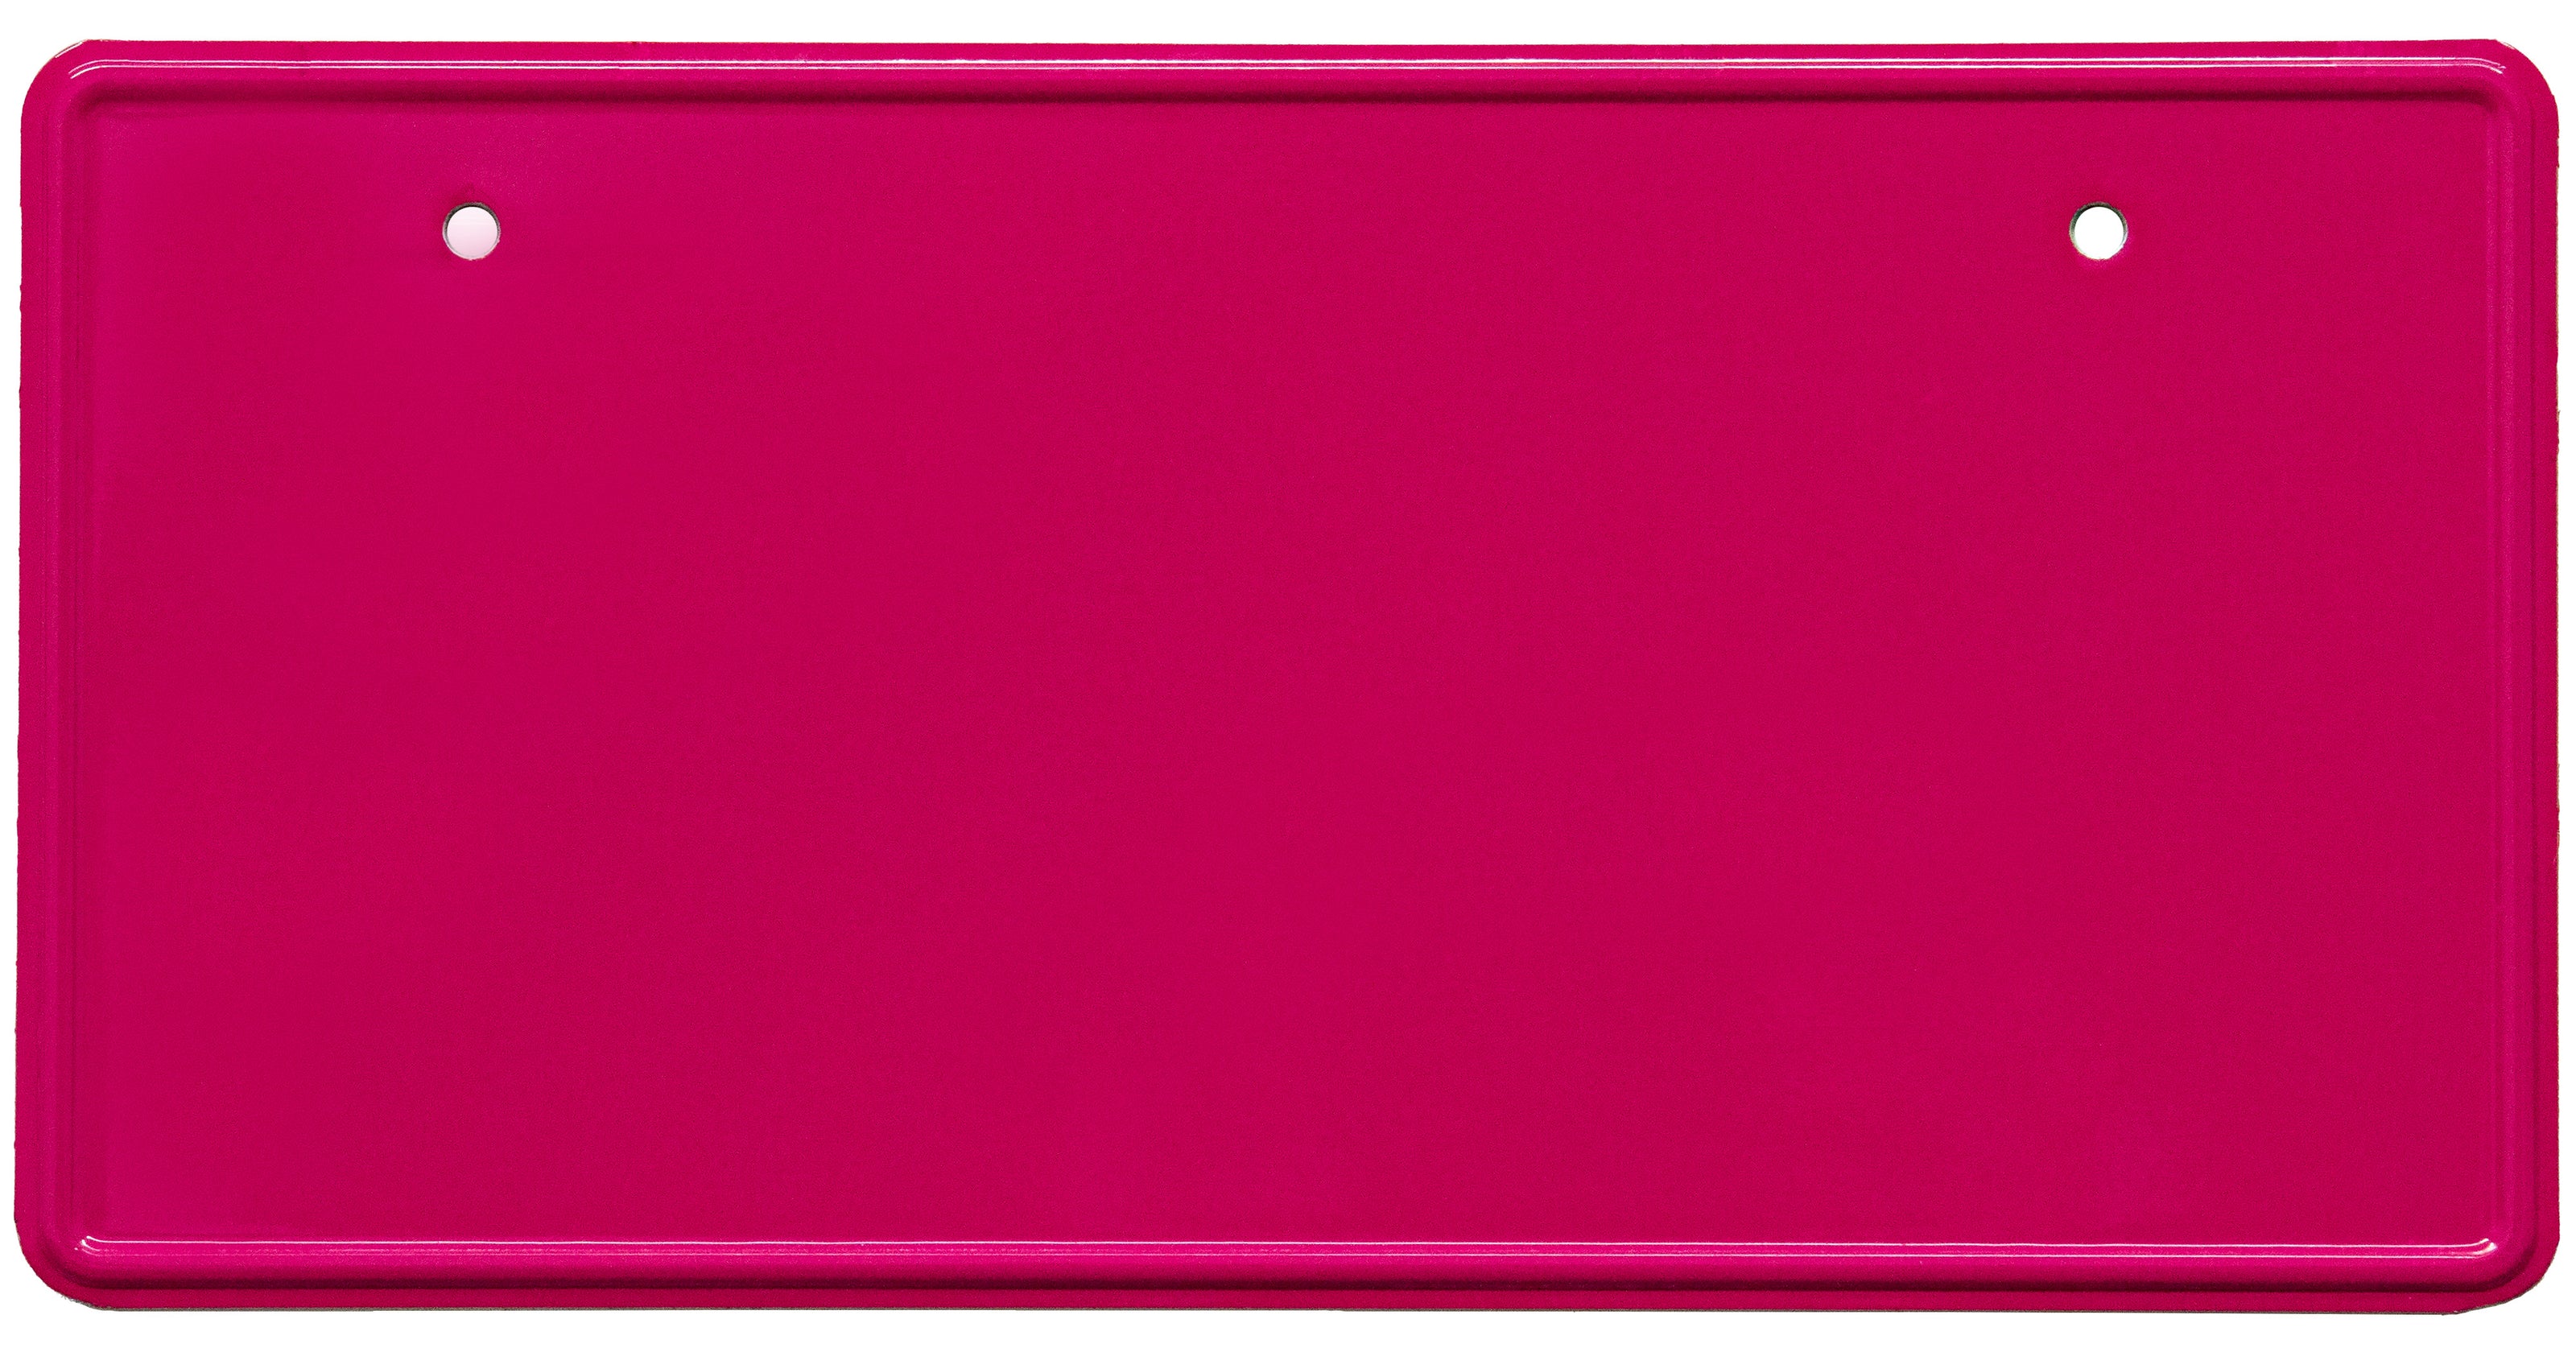 Gloss pink Japanese license plate